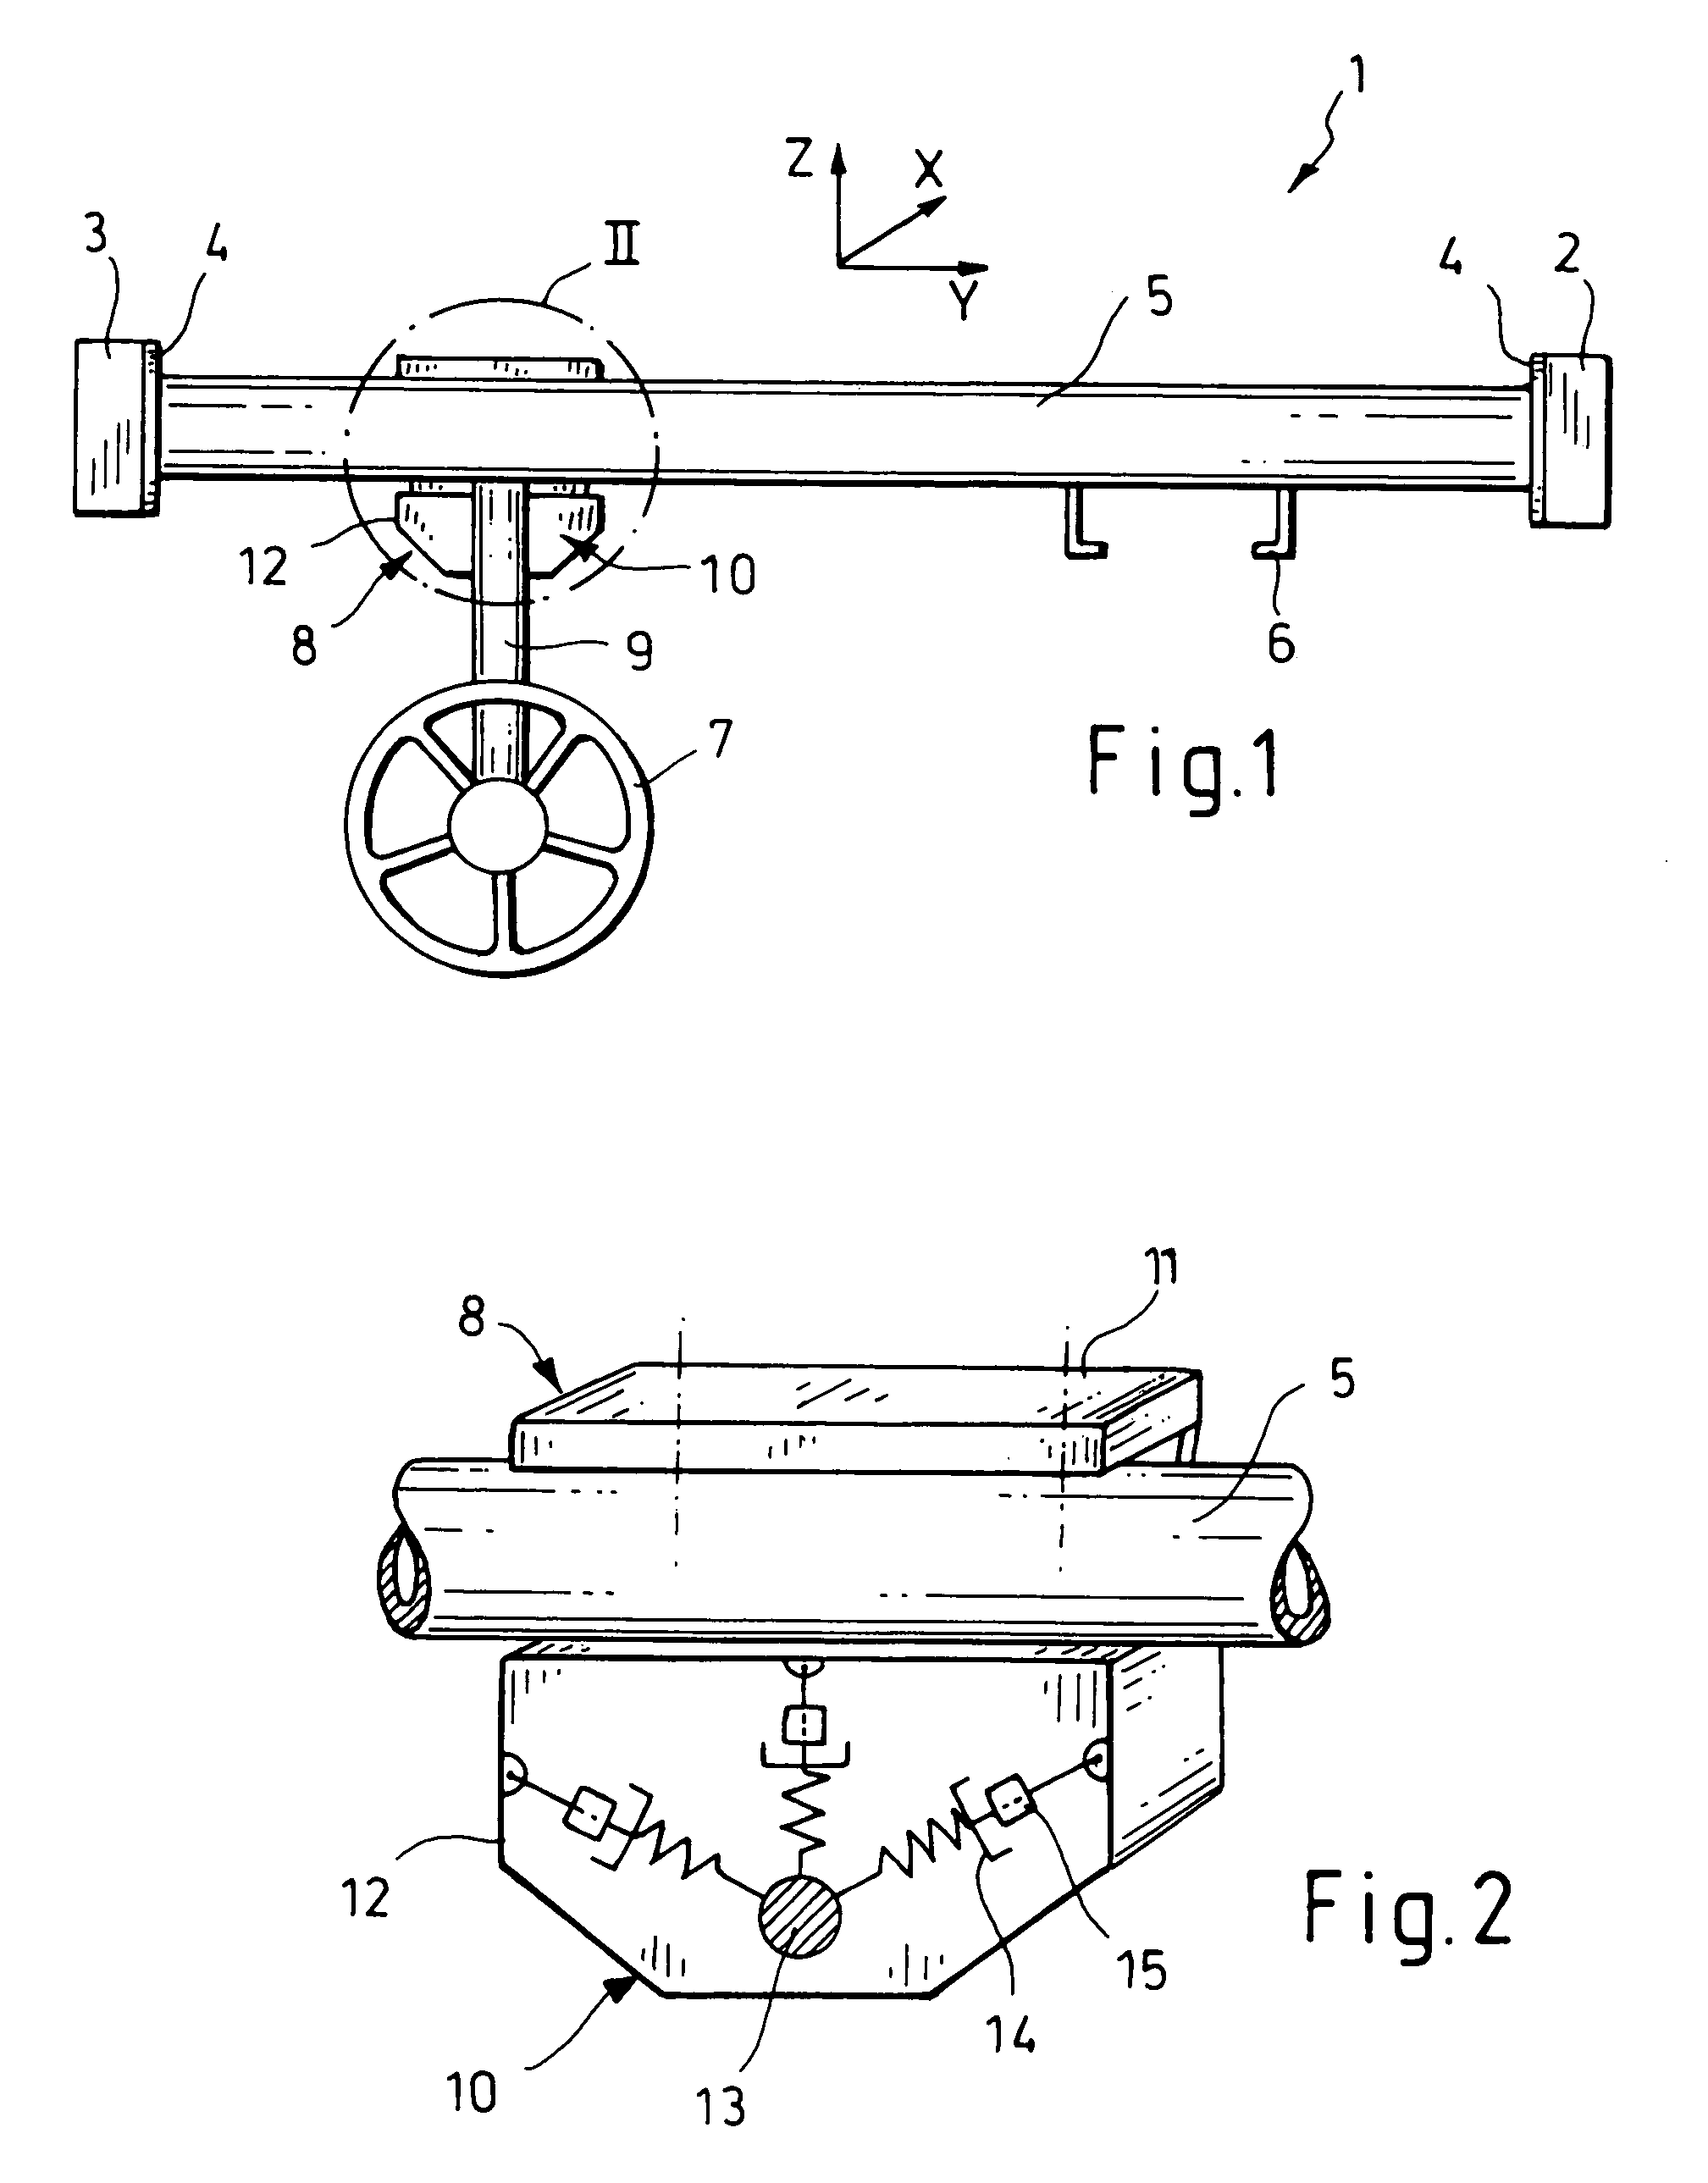 Dashboard support with single-mass oscillation for vibration damping